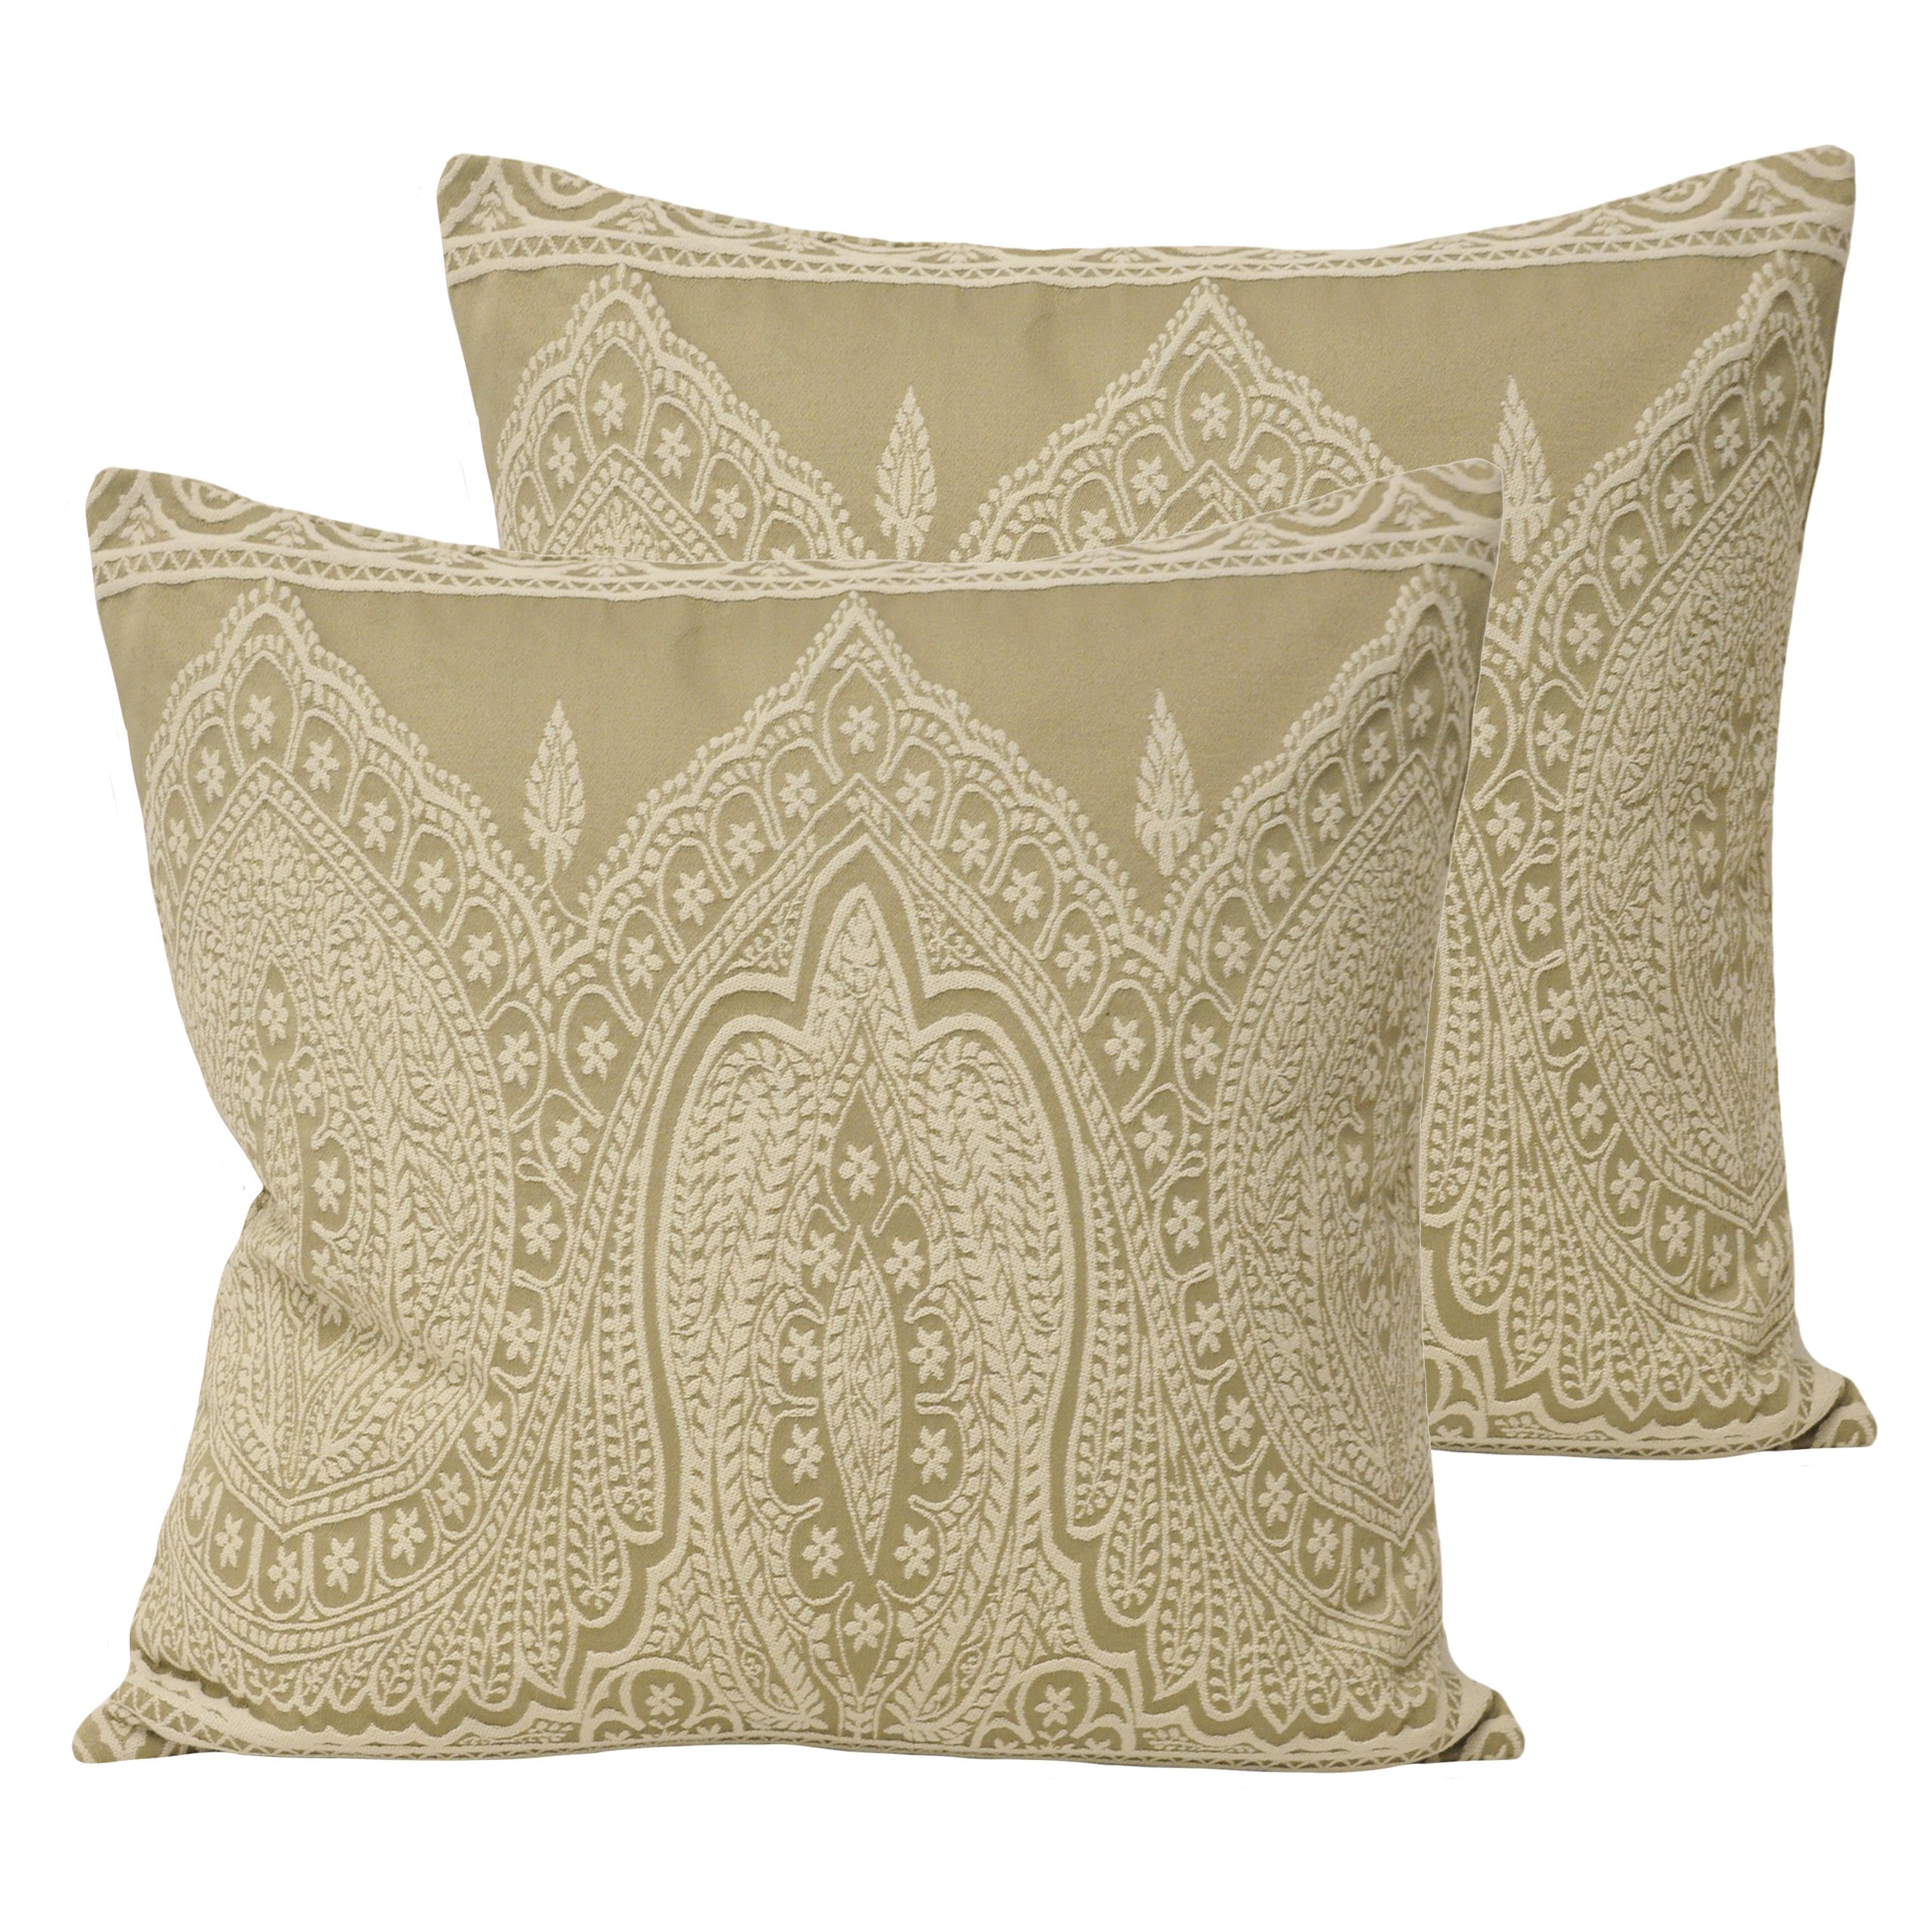 The striking paisley pattern, sometimes referred to as the Persian pickles pattern, has been a popular choice in interior decor for centuries. The Paisley cushion cover comes embellished with a traditional paisley pattern for a contemporary look, which will work in tandem with a range of furniture and decor. Complete with knife edging and a hidden zip design you'll fall in love with this cushion cover instantly. Manufactured to the highest standards this exquisite cushion is made from polycotton fabric making it an ideal choice for beds and sofas. Fully machine washable at 40 degrees this cushion cover is easy to care for. Iron on a cool setting for the best finish.